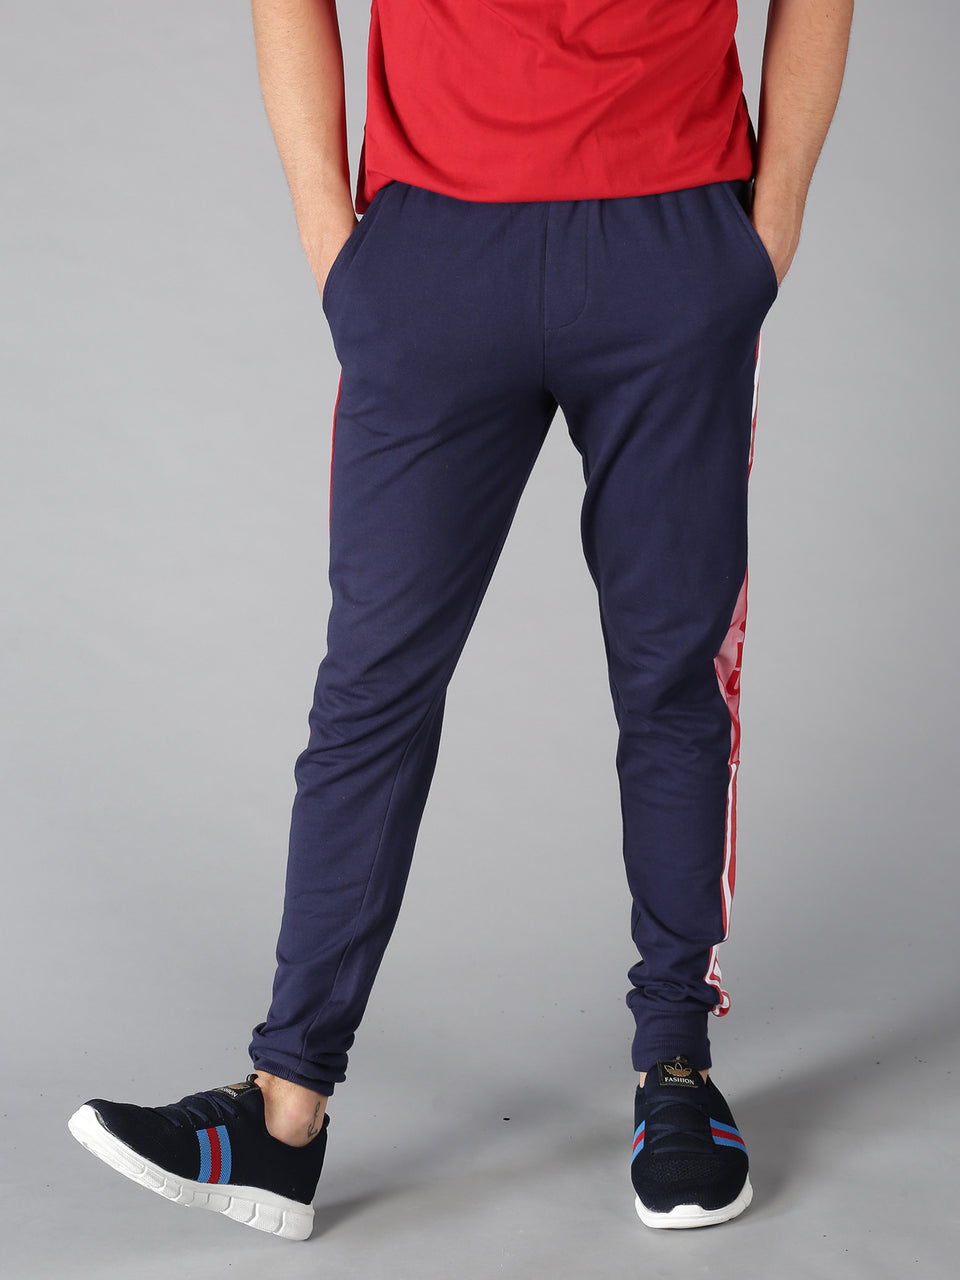 AMLA FASHION Striped Men Grey Track Pants - Buy AMLA FASHION Striped Men  Grey Track Pants Online at Best Prices in India | Shopsy.in